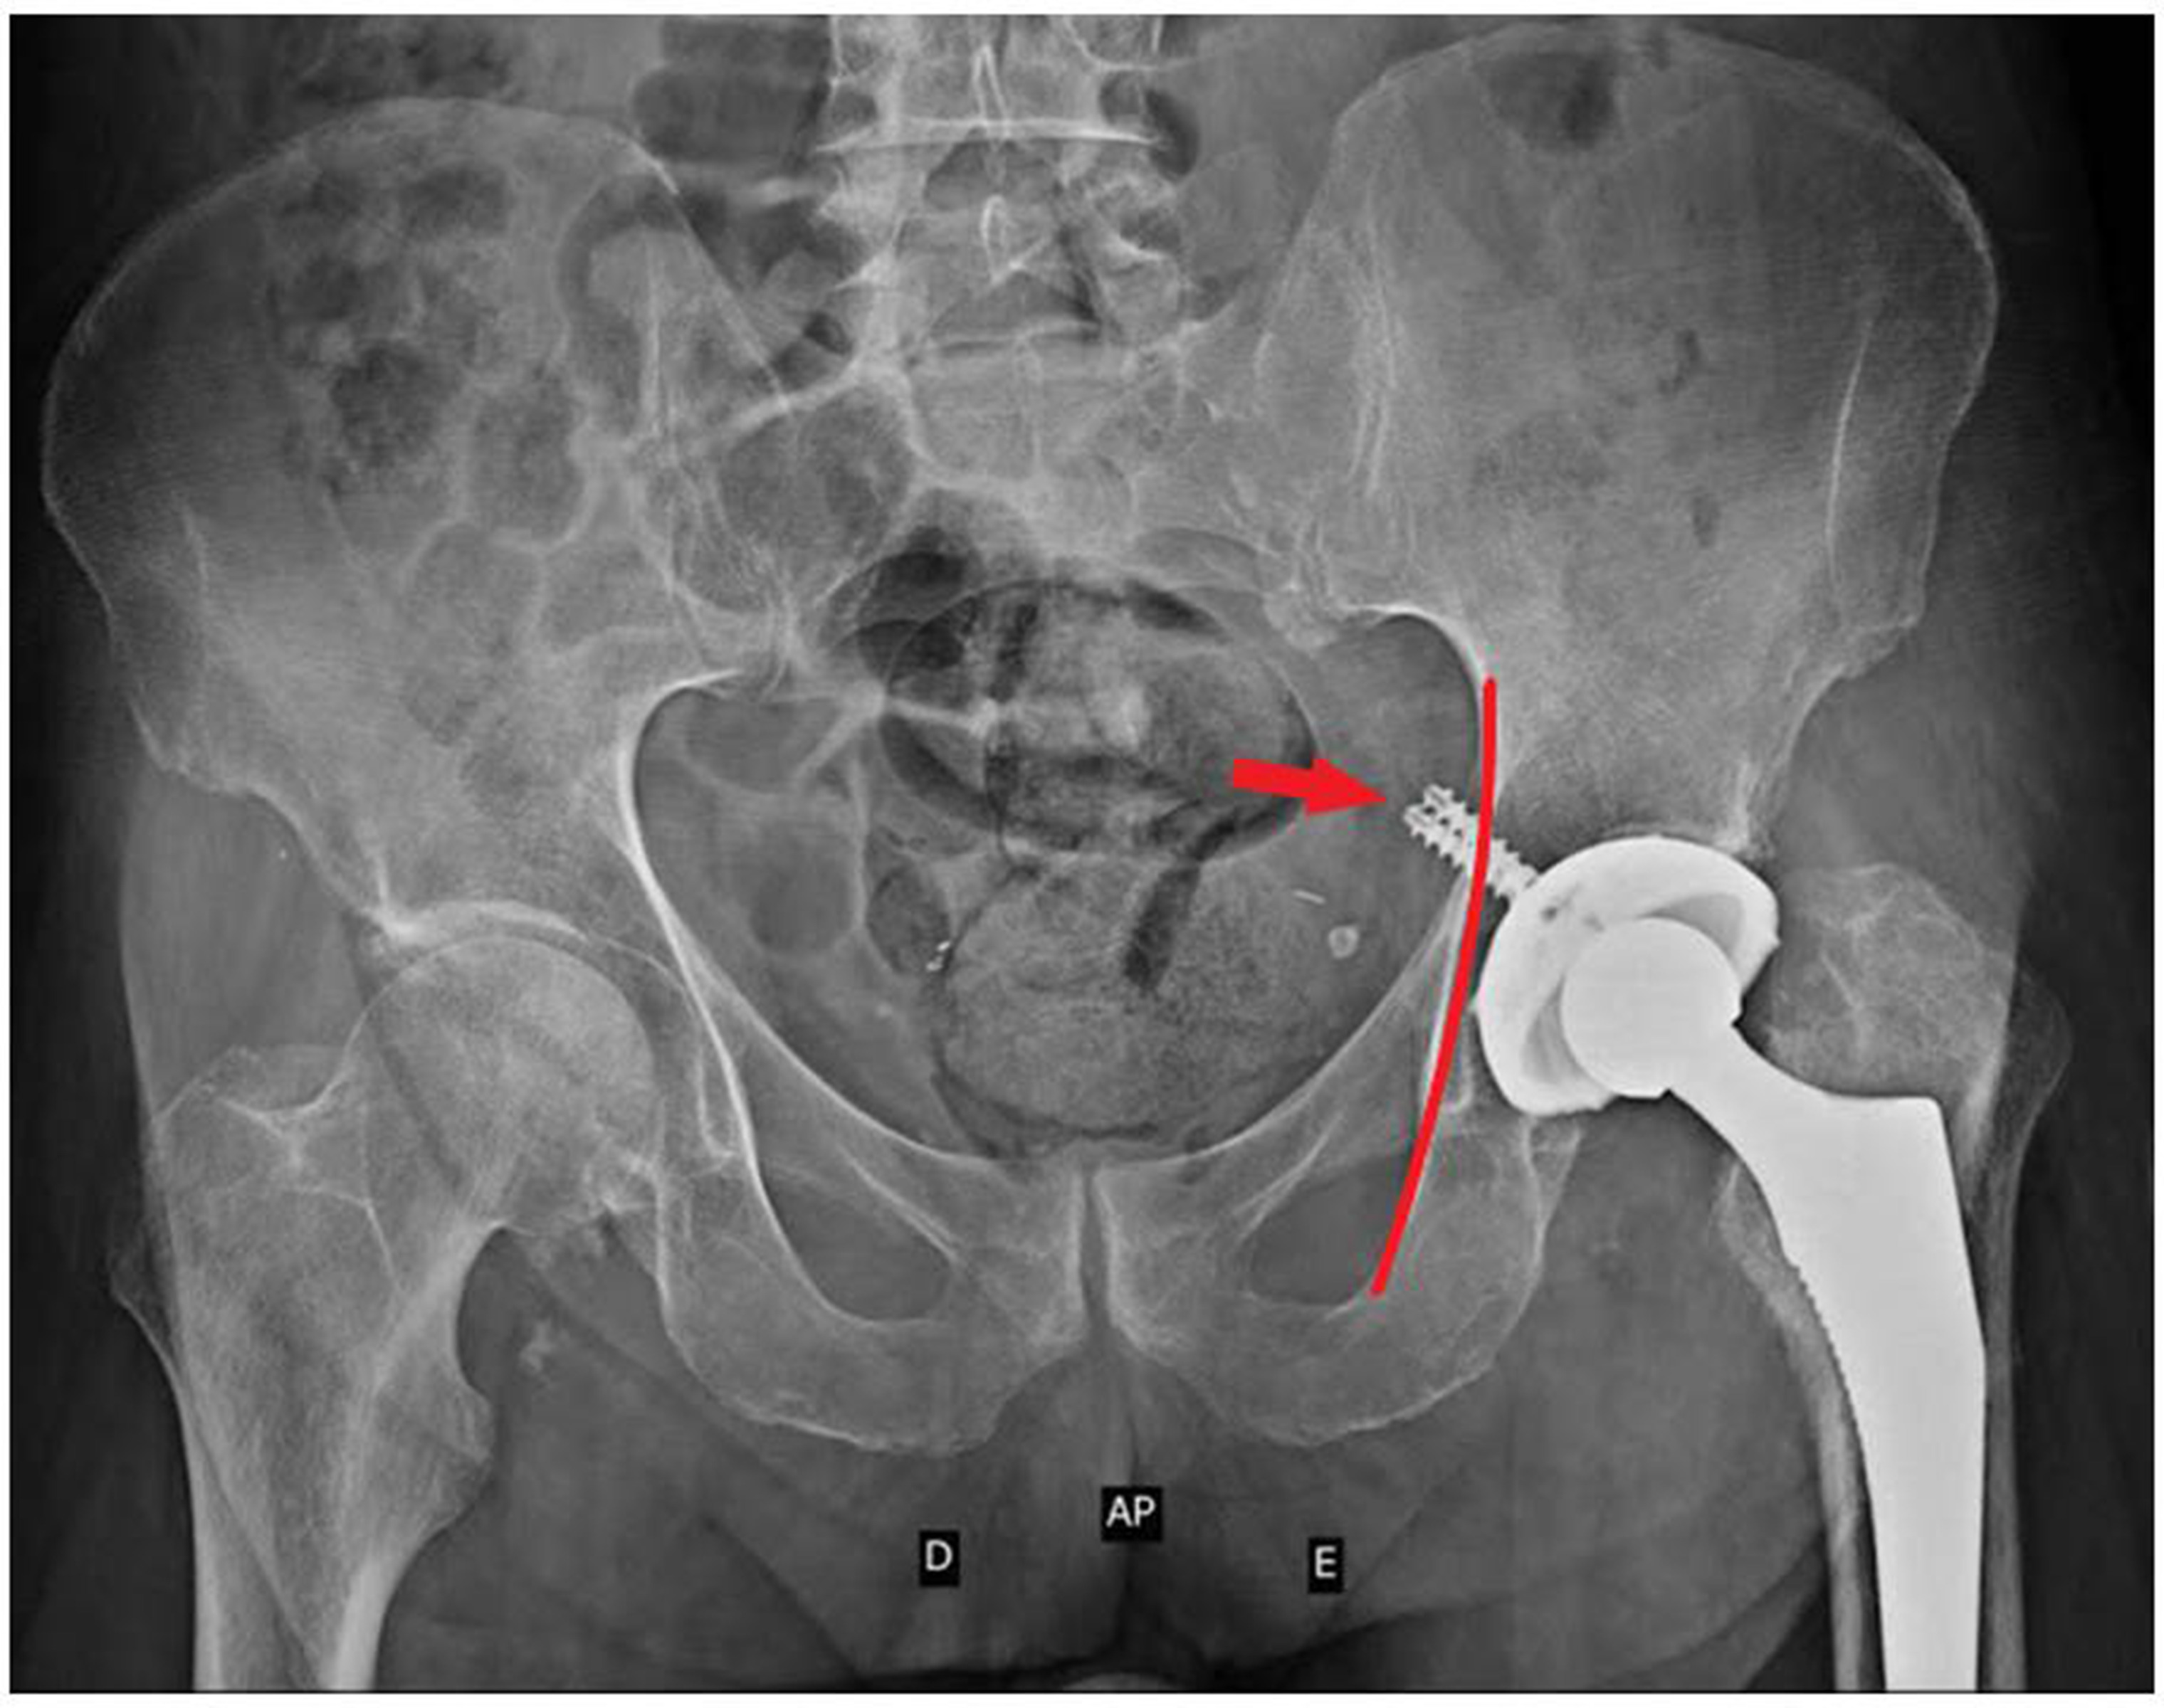 Fig. 1 
          Pelvis anteroposterior radiograph demonstrating two screws (red arrow) overlapping the ilio ischiatic line (red line) > 5 mm. It is a red flag to vascular injury during revision total hip arthroplasty.
        